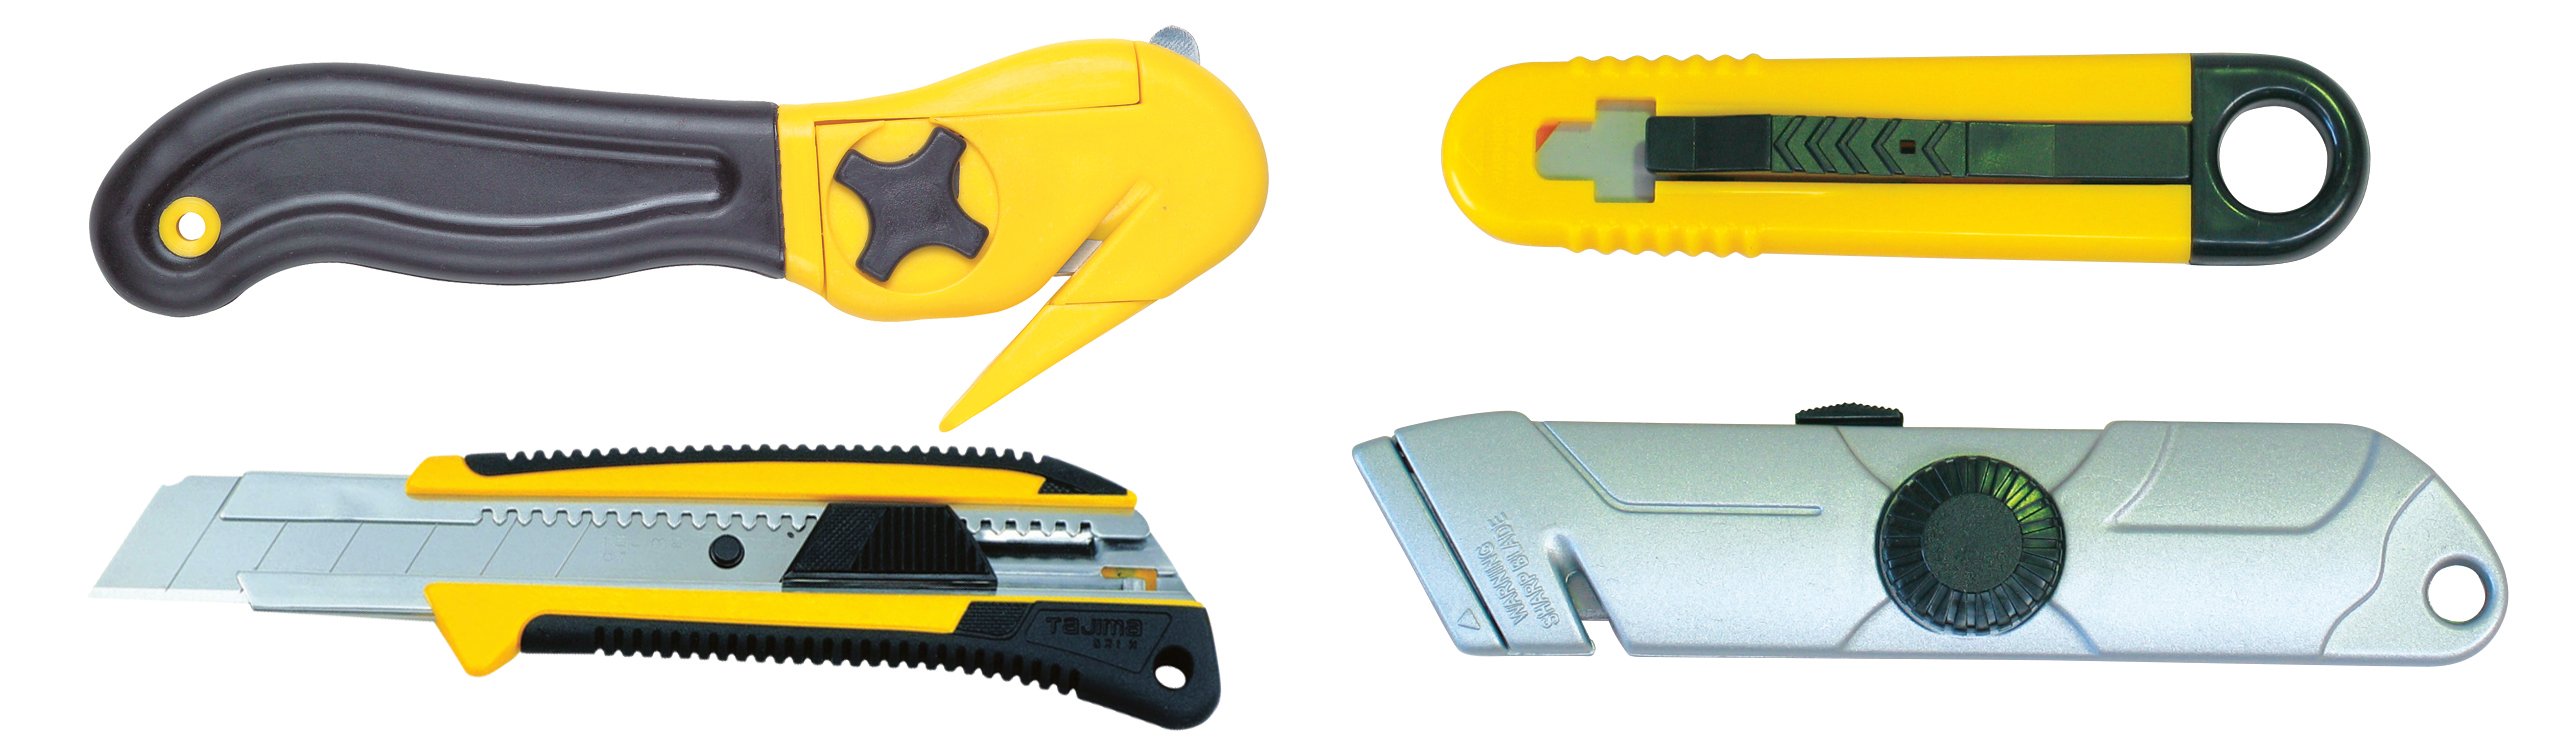 Choose a retractable or hidden blade for your utility knife